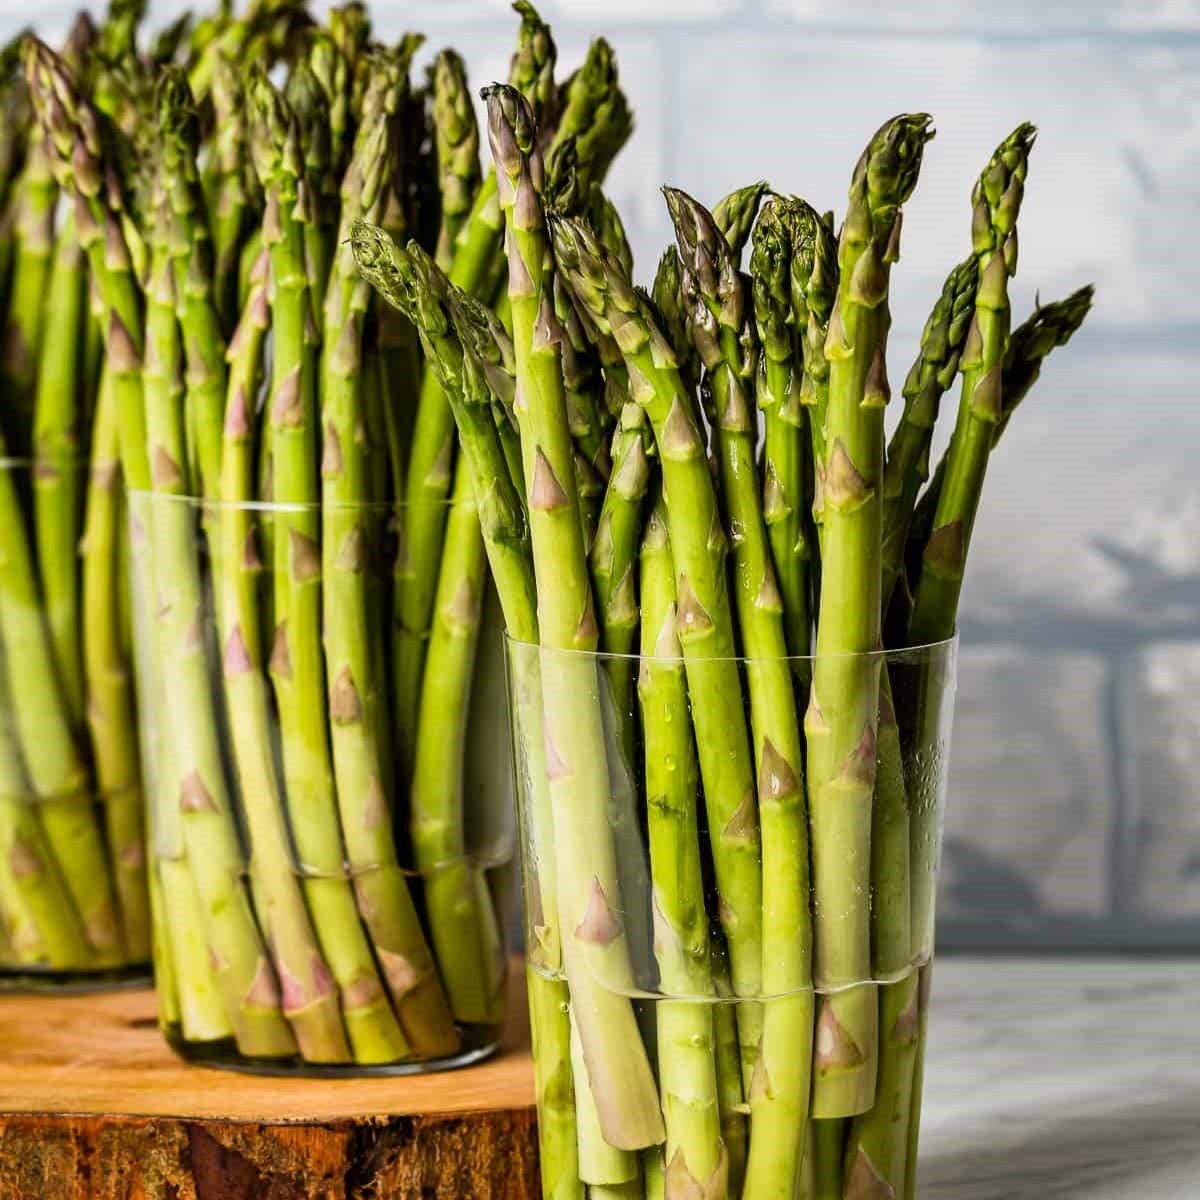 How To Store Asparagus To Last Longer